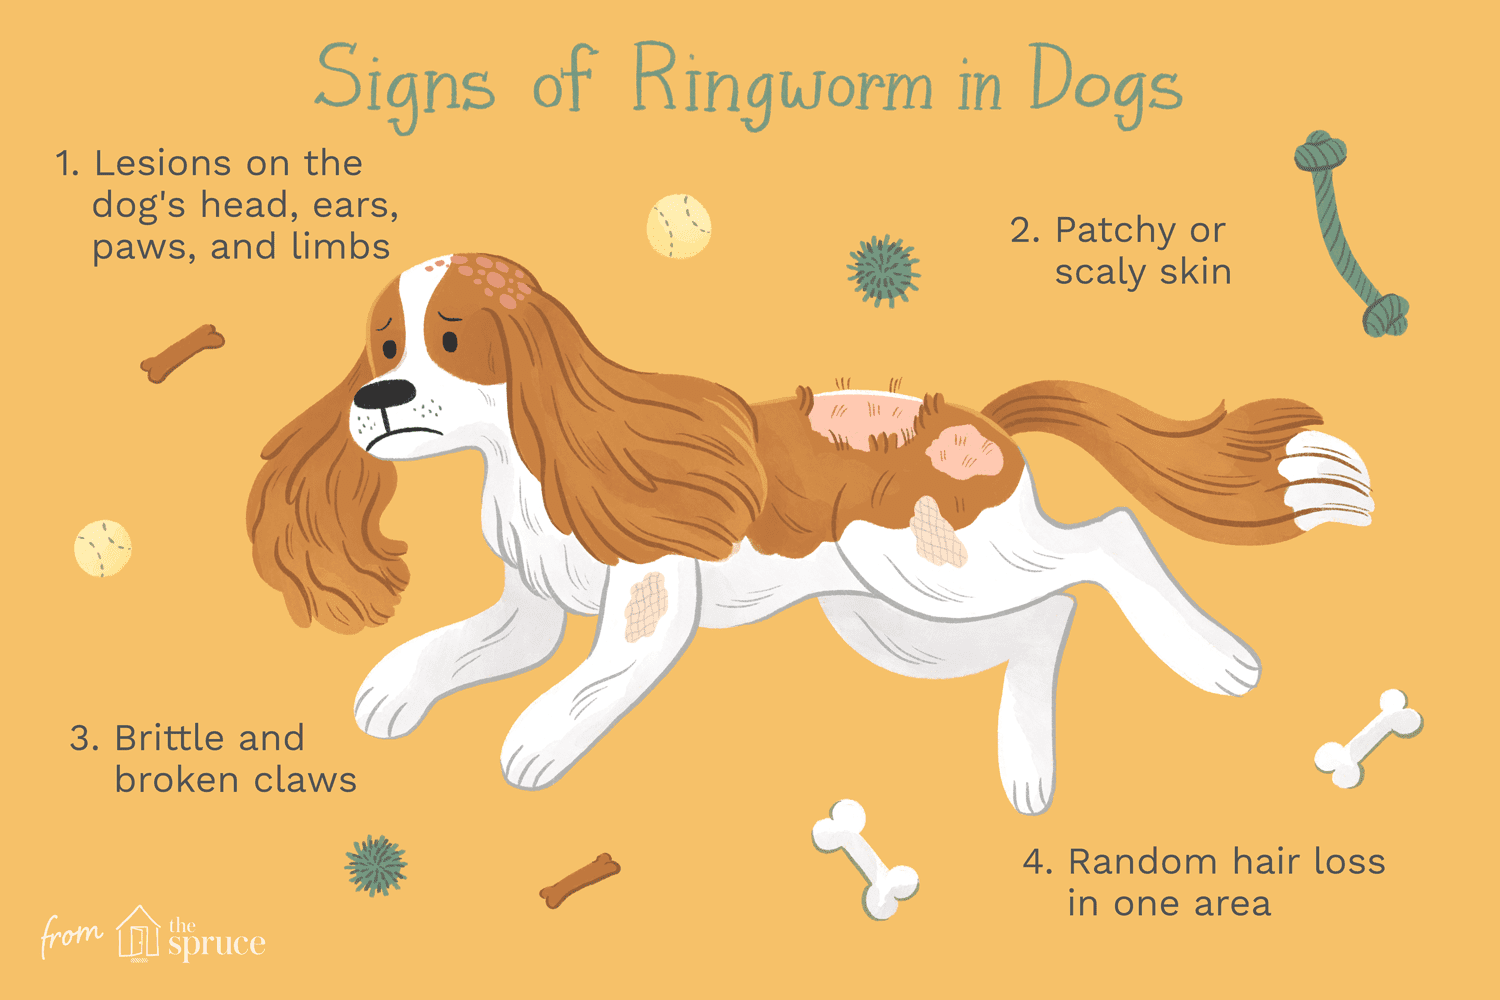 An illustration of signs of ringworm in dogs